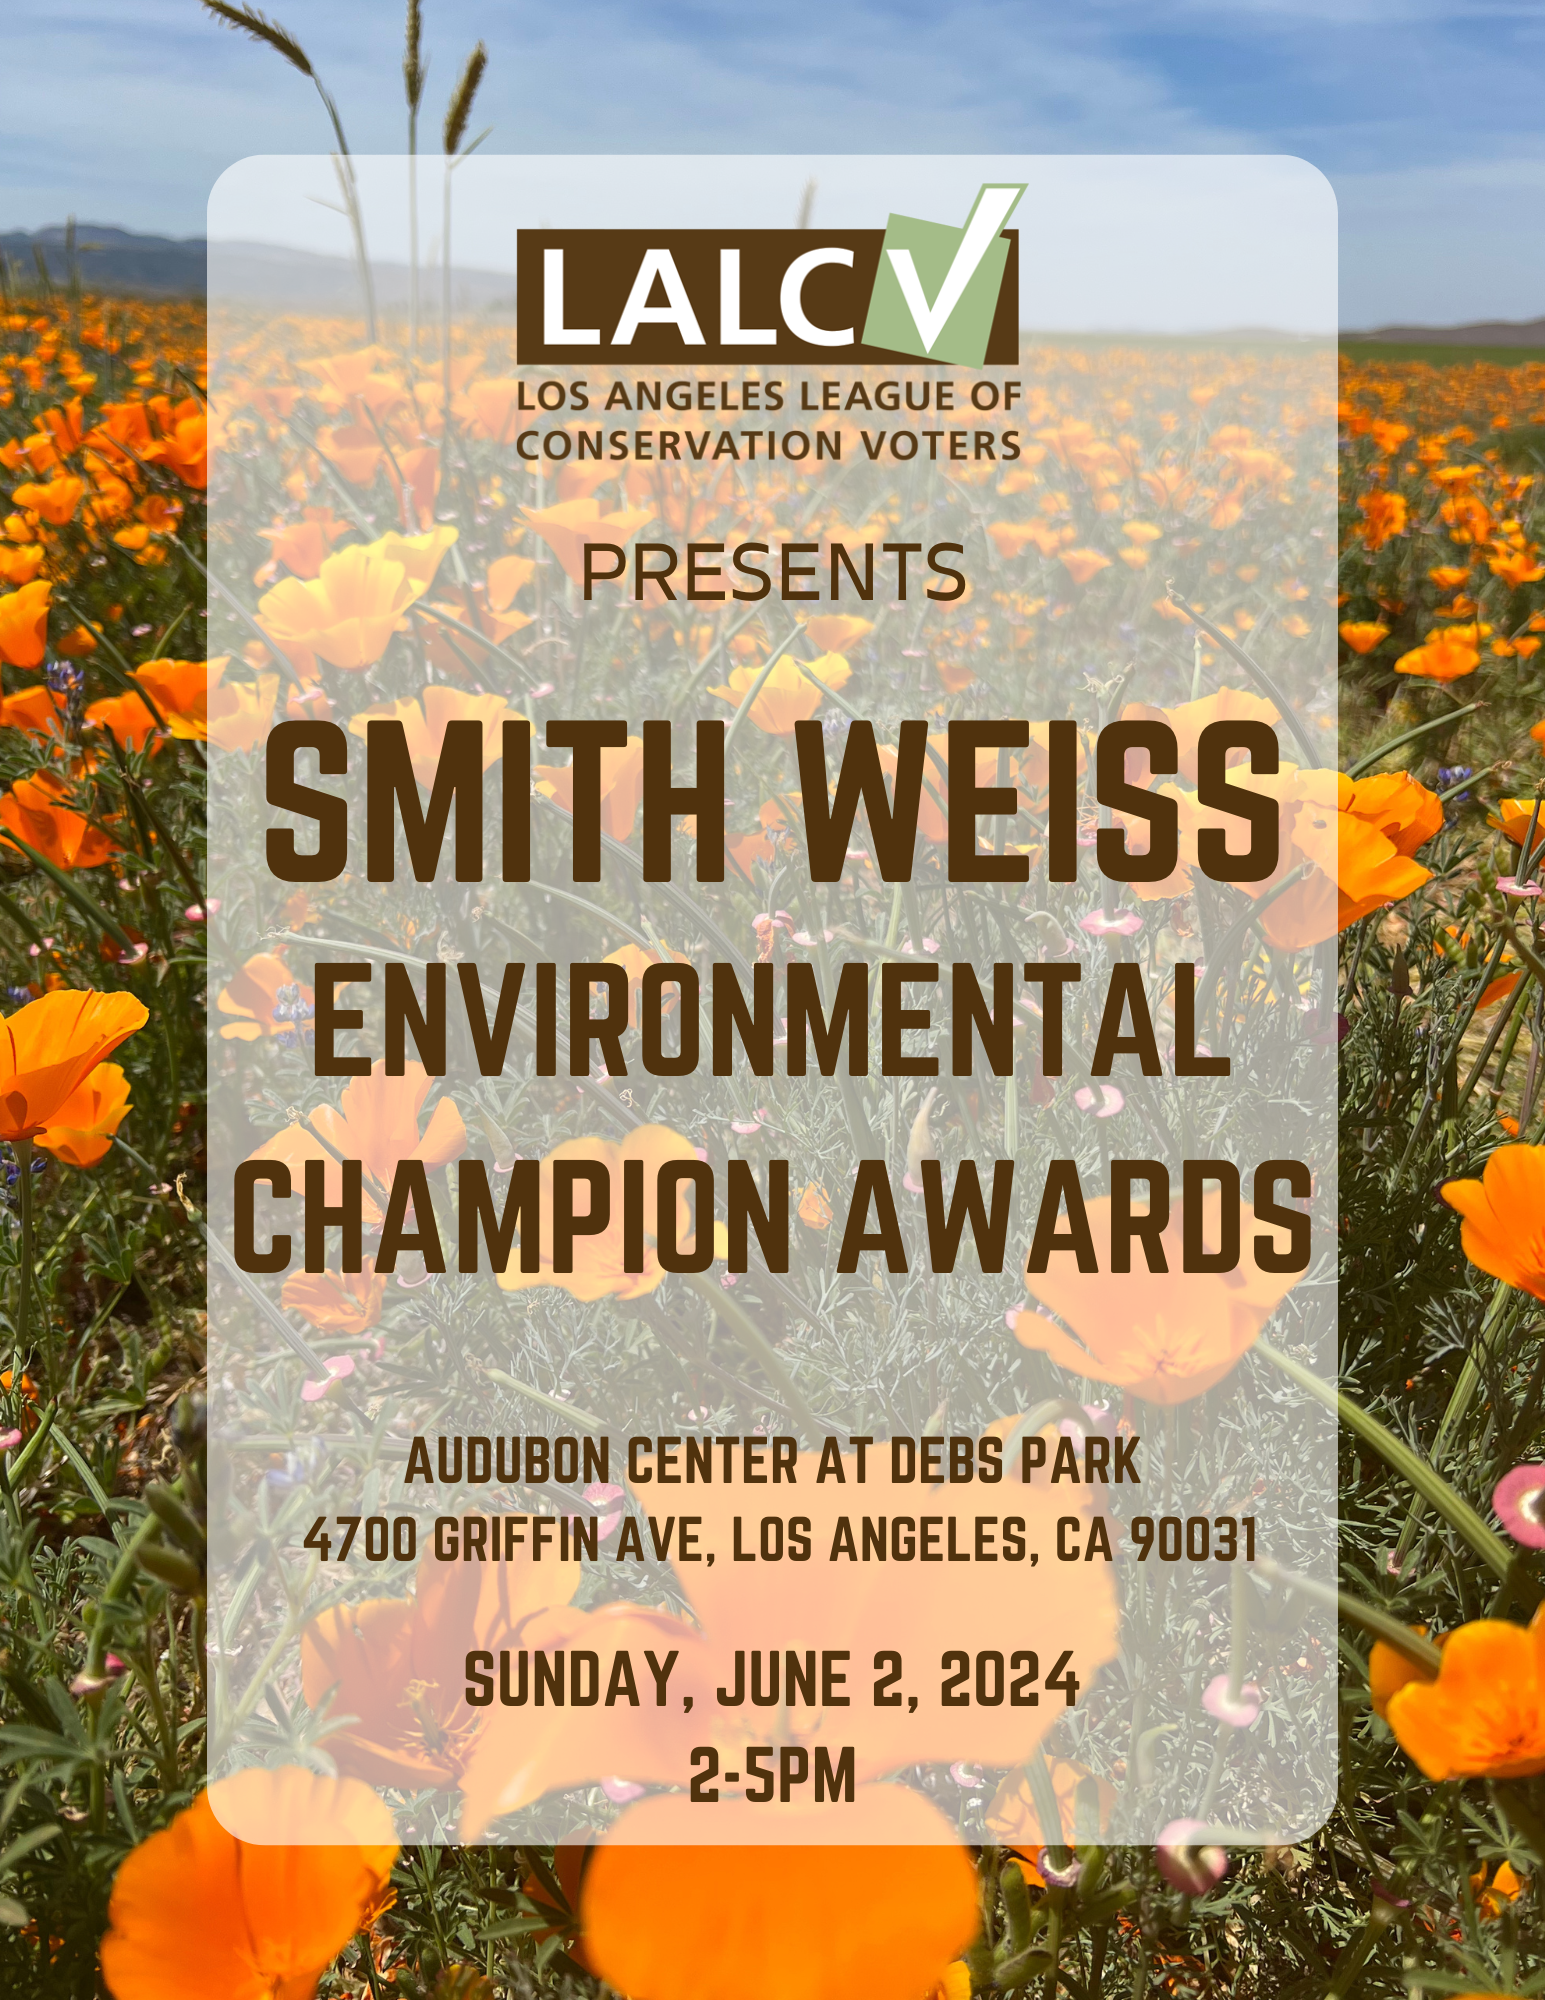 Join us for the Smith Weiss Environmental Champion Awards!